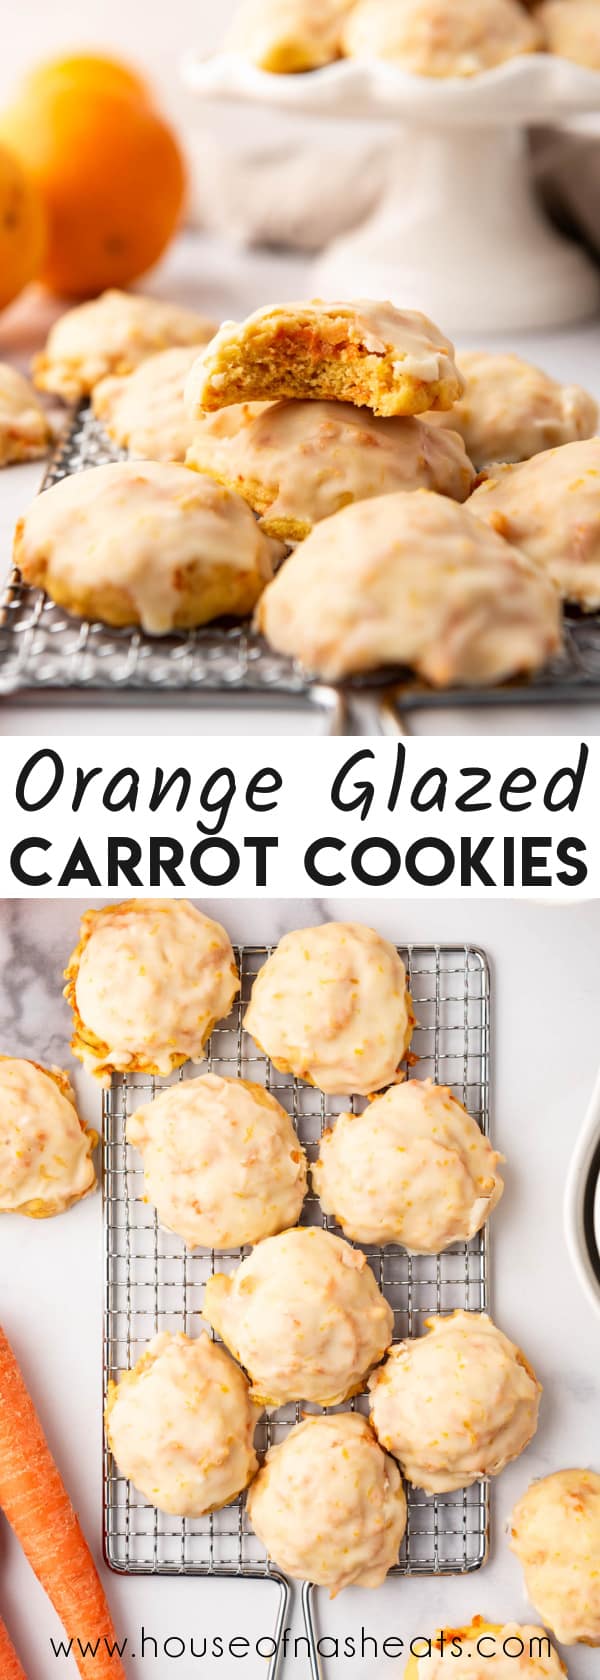 A collage of images of orange glazed carrot cookies with text overlay.